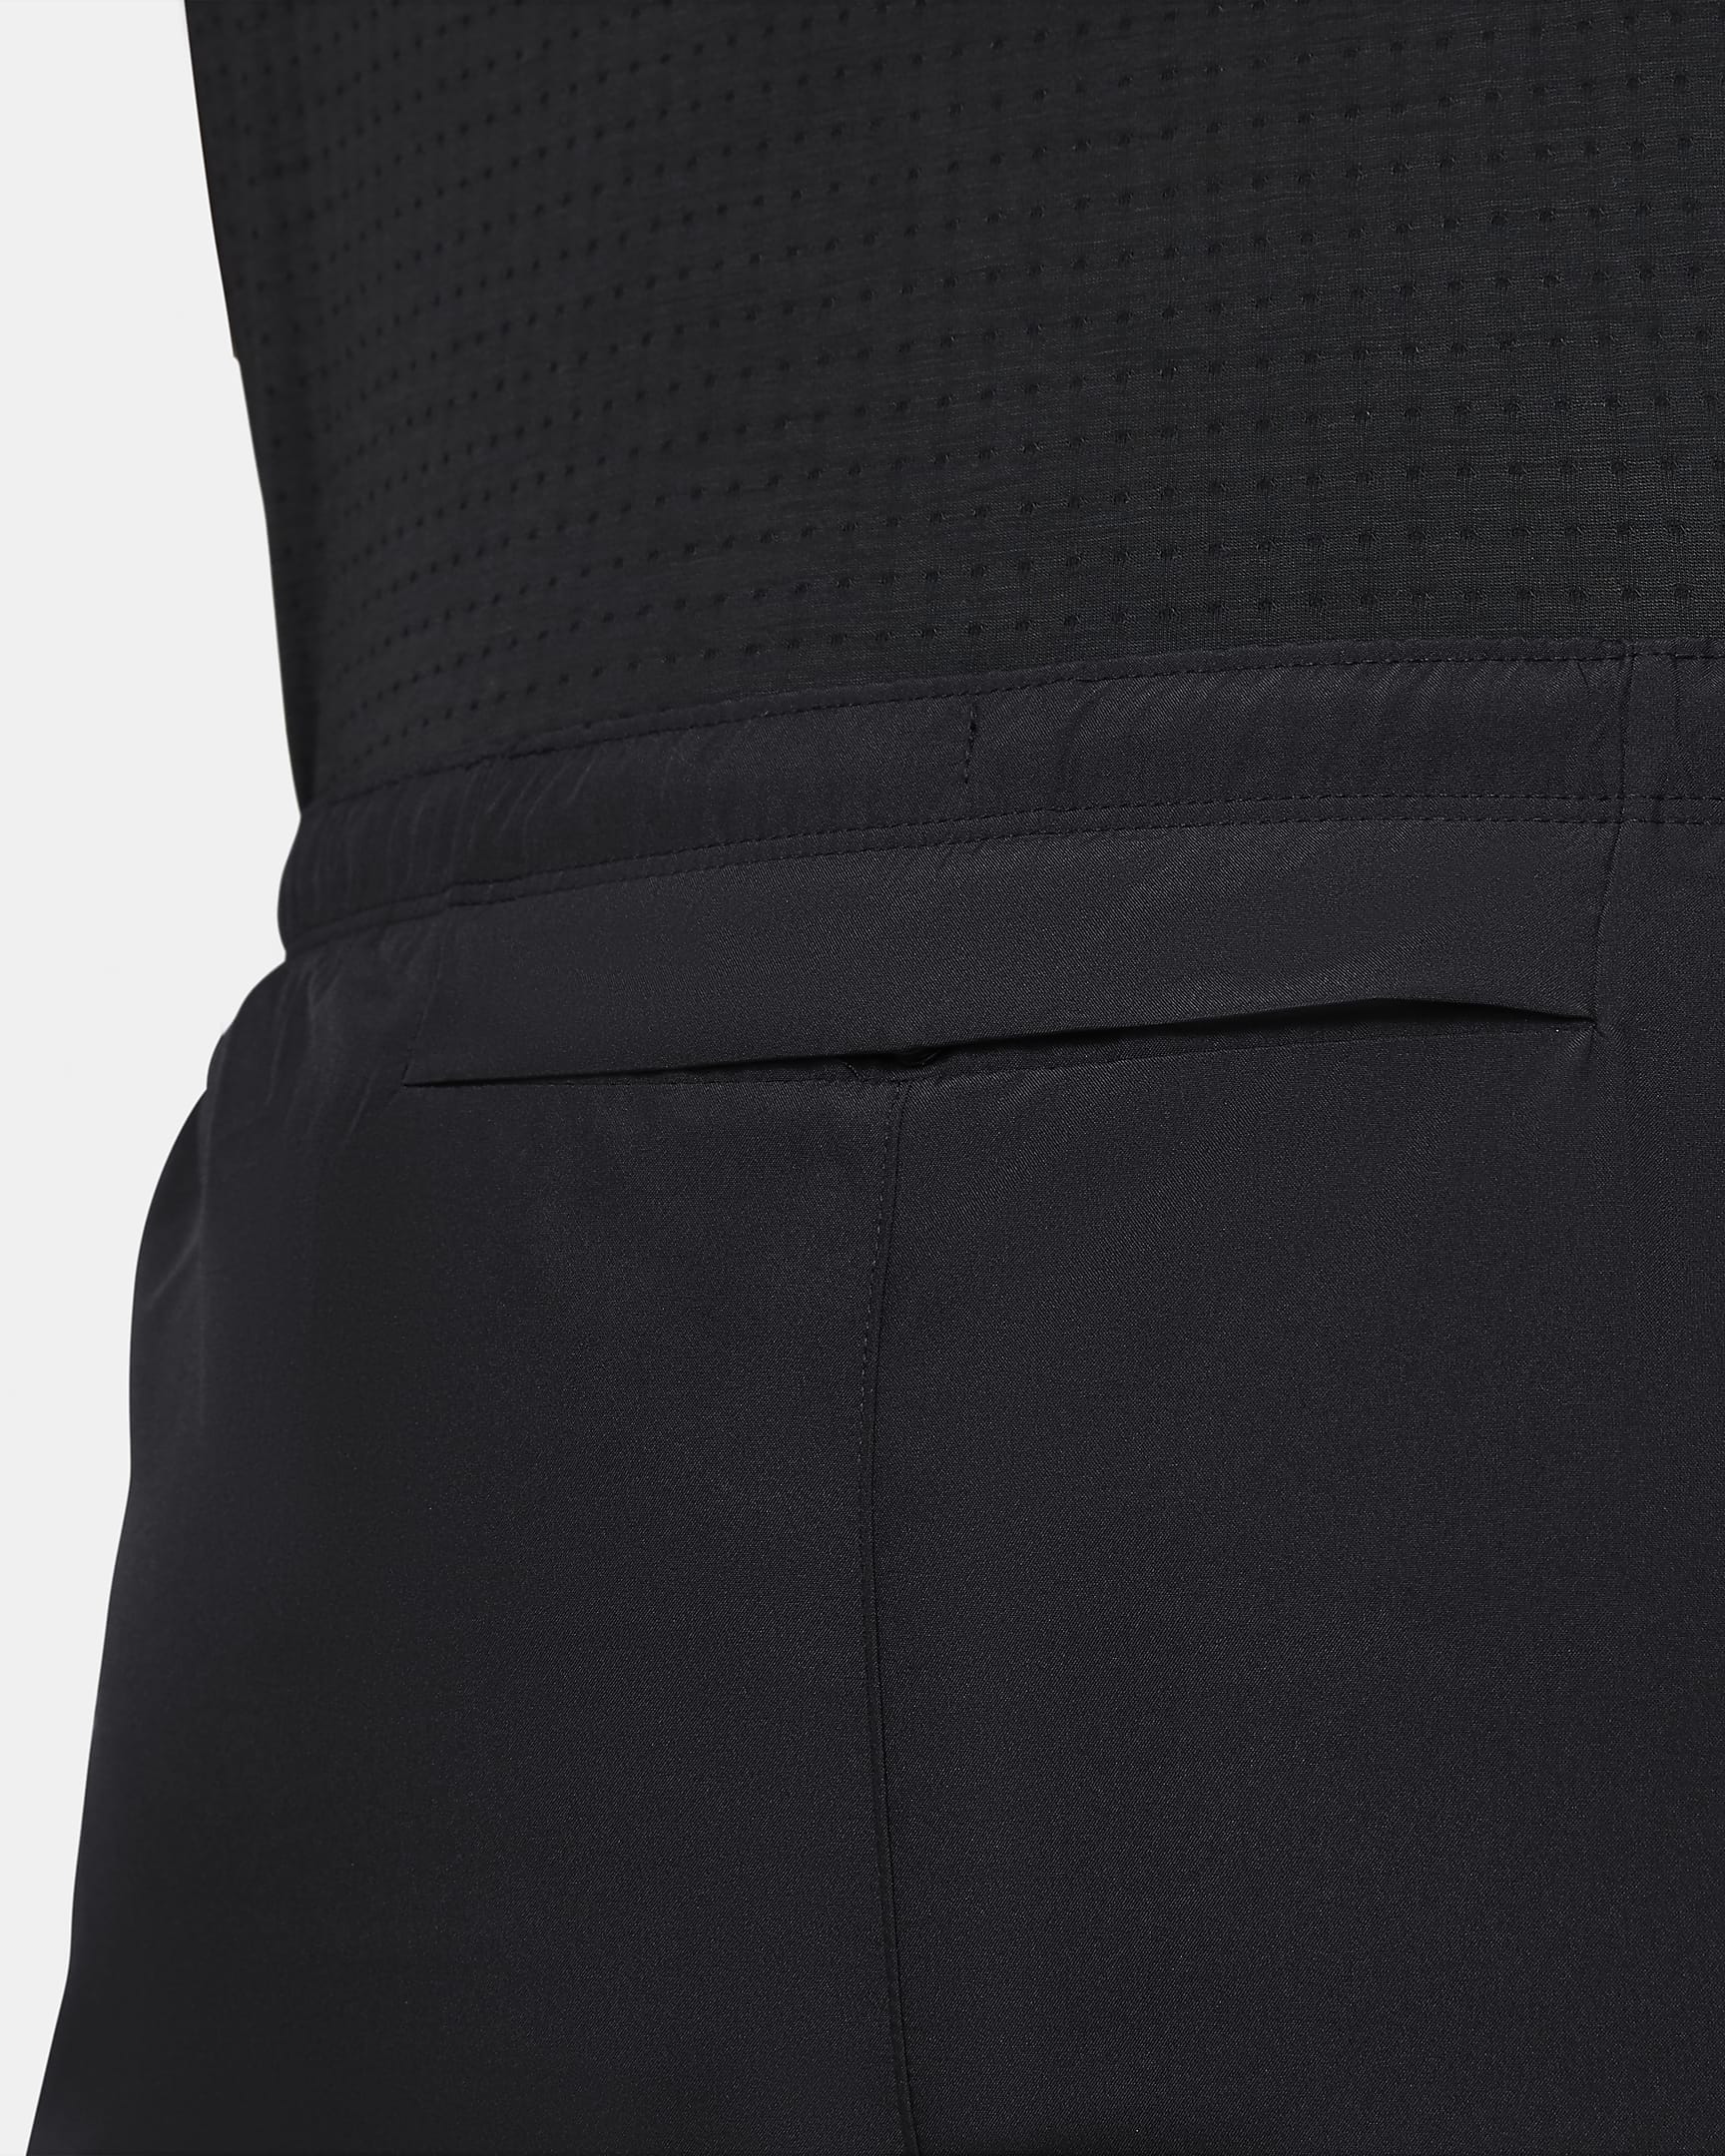 Nike Challenger Men's 13cm (approx.) Brief-Lined Running Shorts. Nike UK